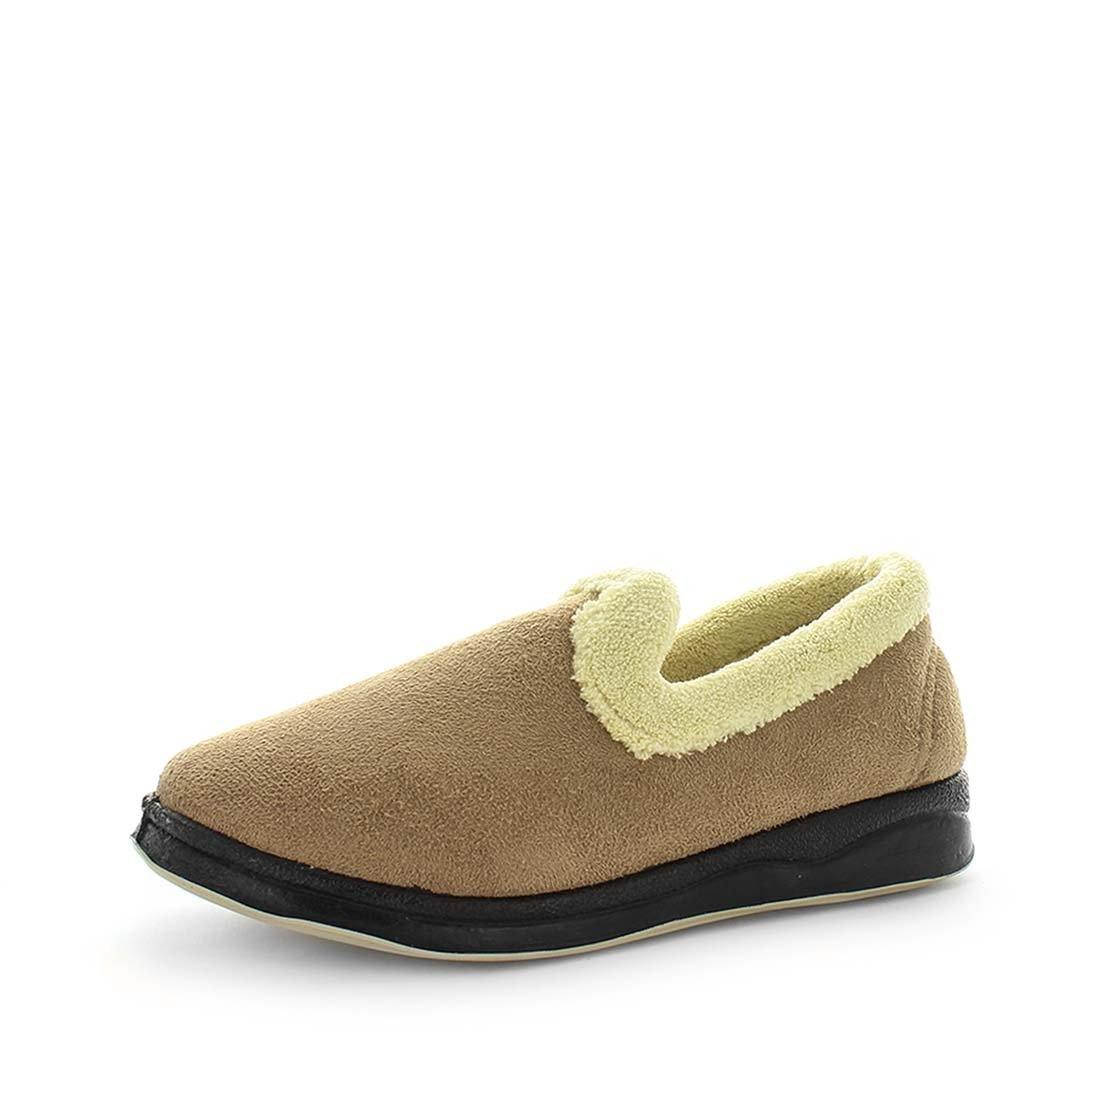 Classic womens slip on slipper, Emille by panda slippers. A camel slipper made with soft materials and comfy fit design for the perfect indoor slipper. showing a non slip sole and micro terry trimming,